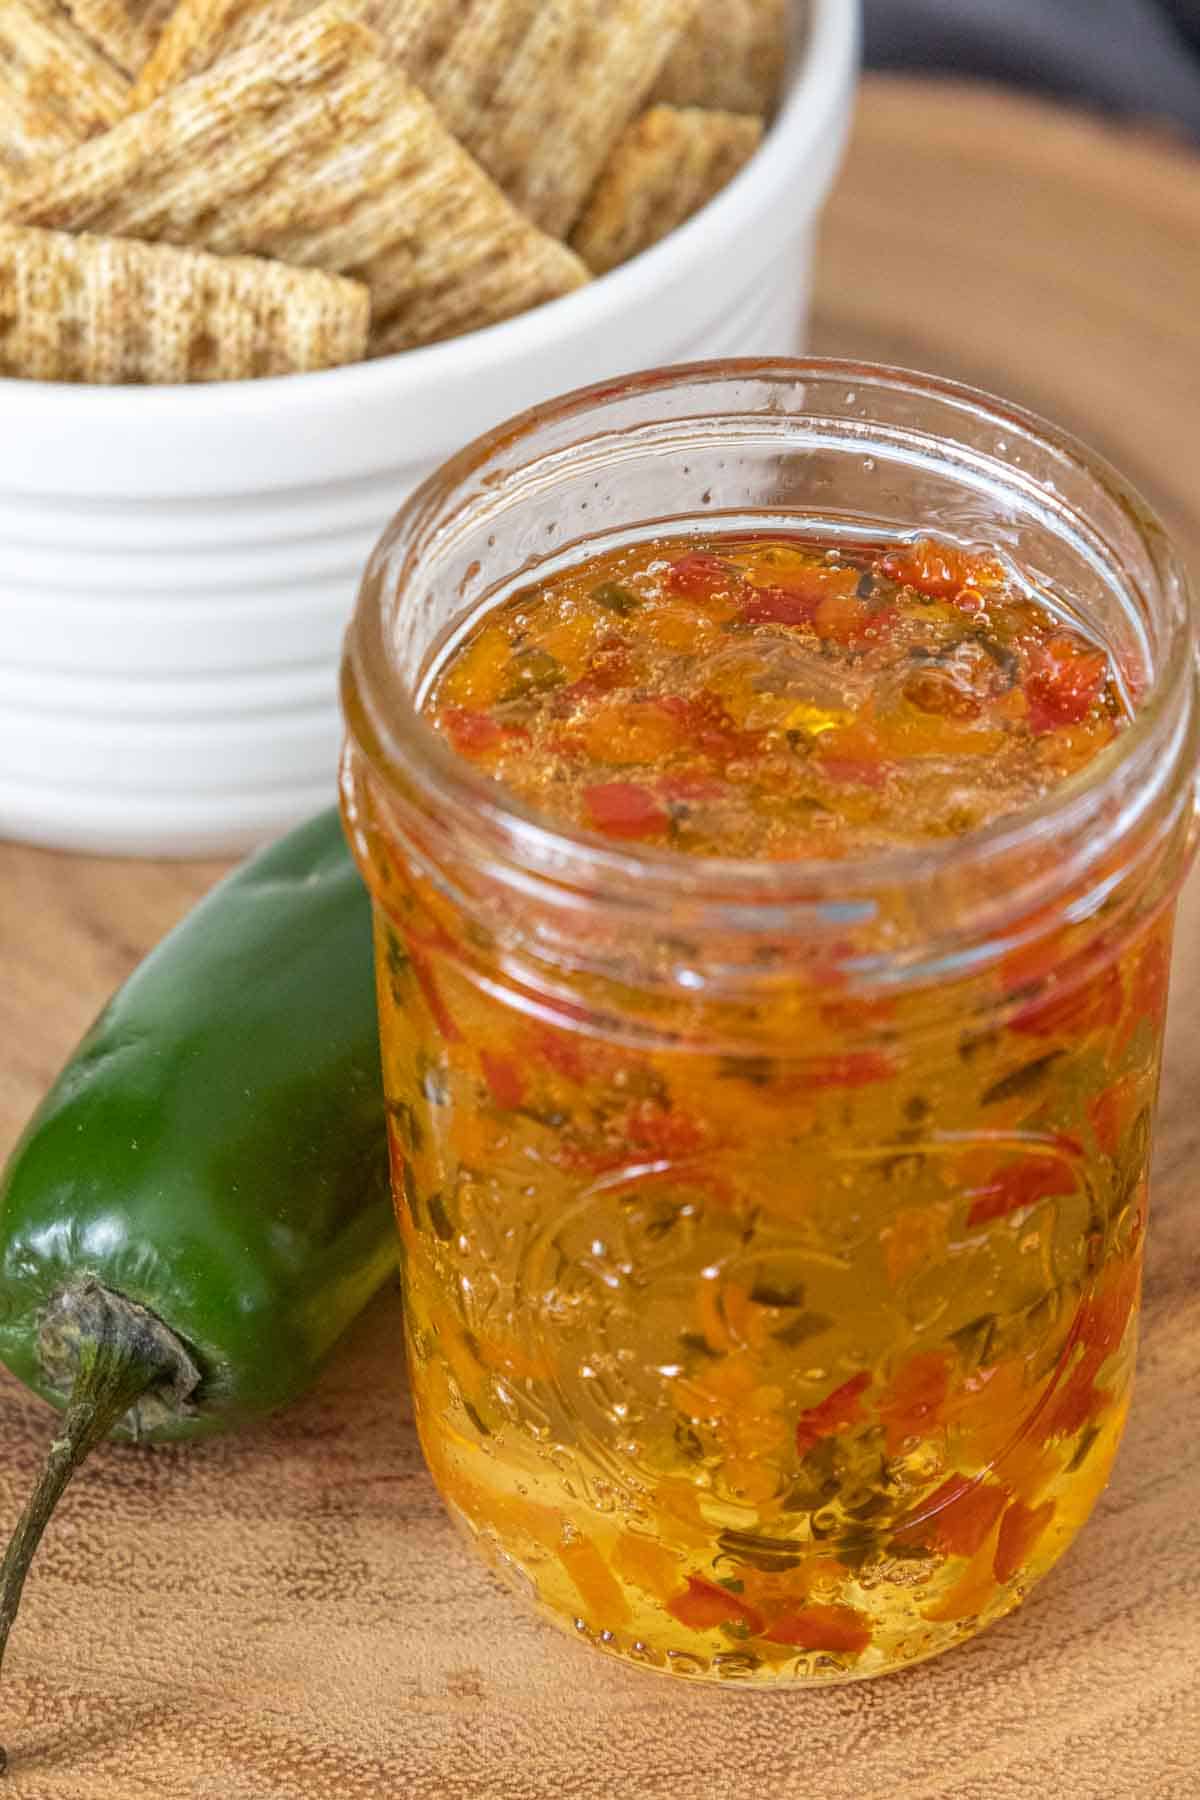 Jar of jalapeño jelly with the lid off so you can see inside the jar.